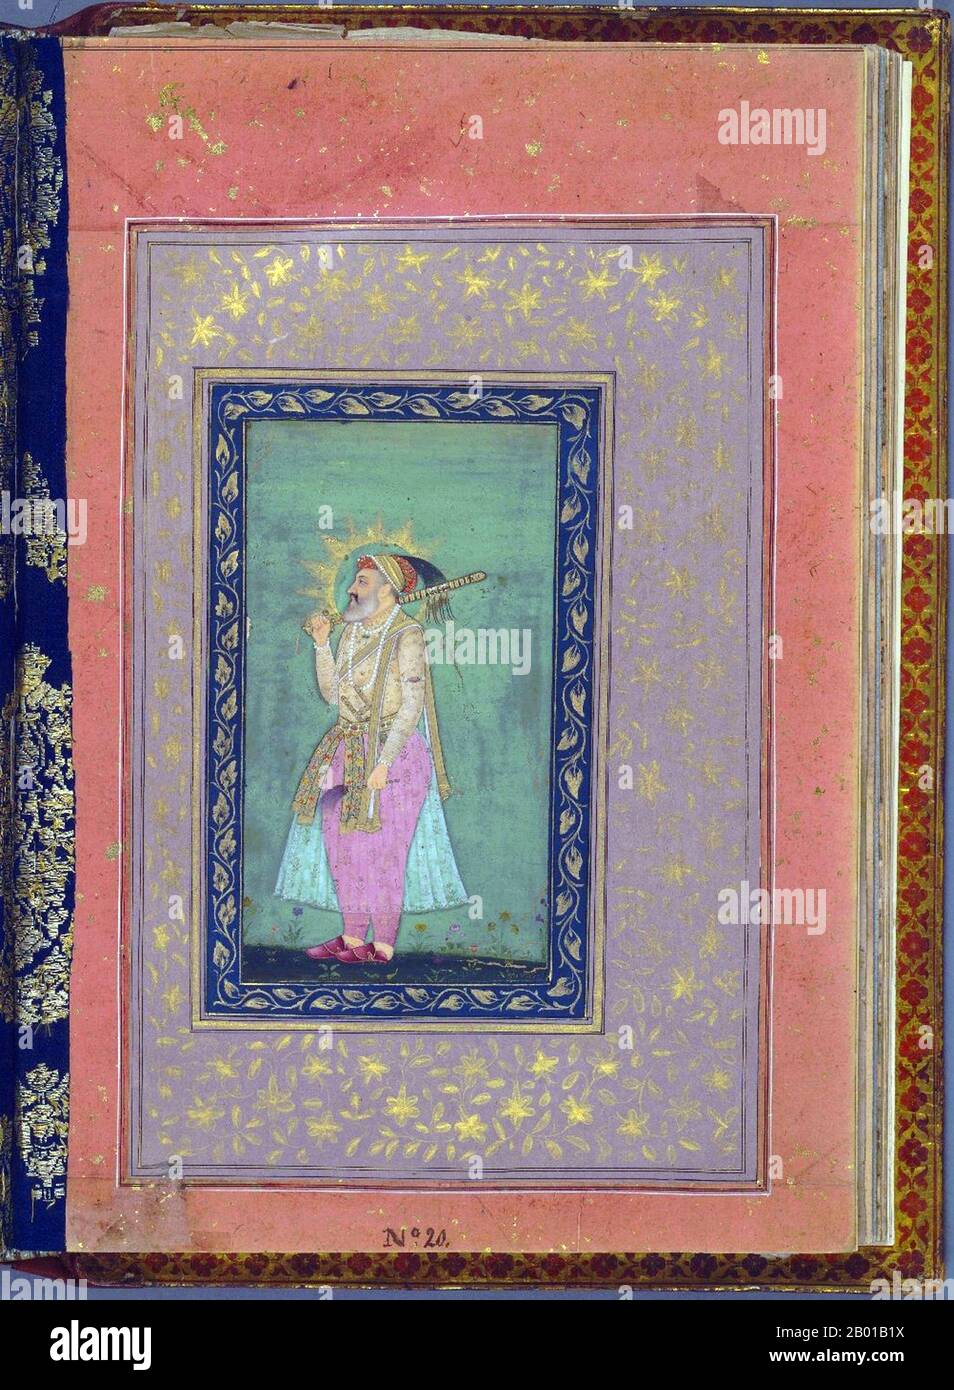 India: Mughal Royal Lineage - Emperor Shah Jahan (5 January 1592 - 22 January 1666). Miniature painting, c. 1640.  Shahanshah Shahab-ud-din Muhammad Shah Jahan I was the fifth emperor of the Mughal Empire, ruling from 1628 until 1658. The name Shah Jahan comes from the Persian meaning 'King of the World'. While young, he was a favourite of his legendary grandfather Akbar the Great. He is also known as 'Shah Jahan the Magnificent'. The period of his reign is considered the golden age of Mughal expansion; by the end of his reign the Mughal Empire covered 3 million square km and most of India. Stock Photo